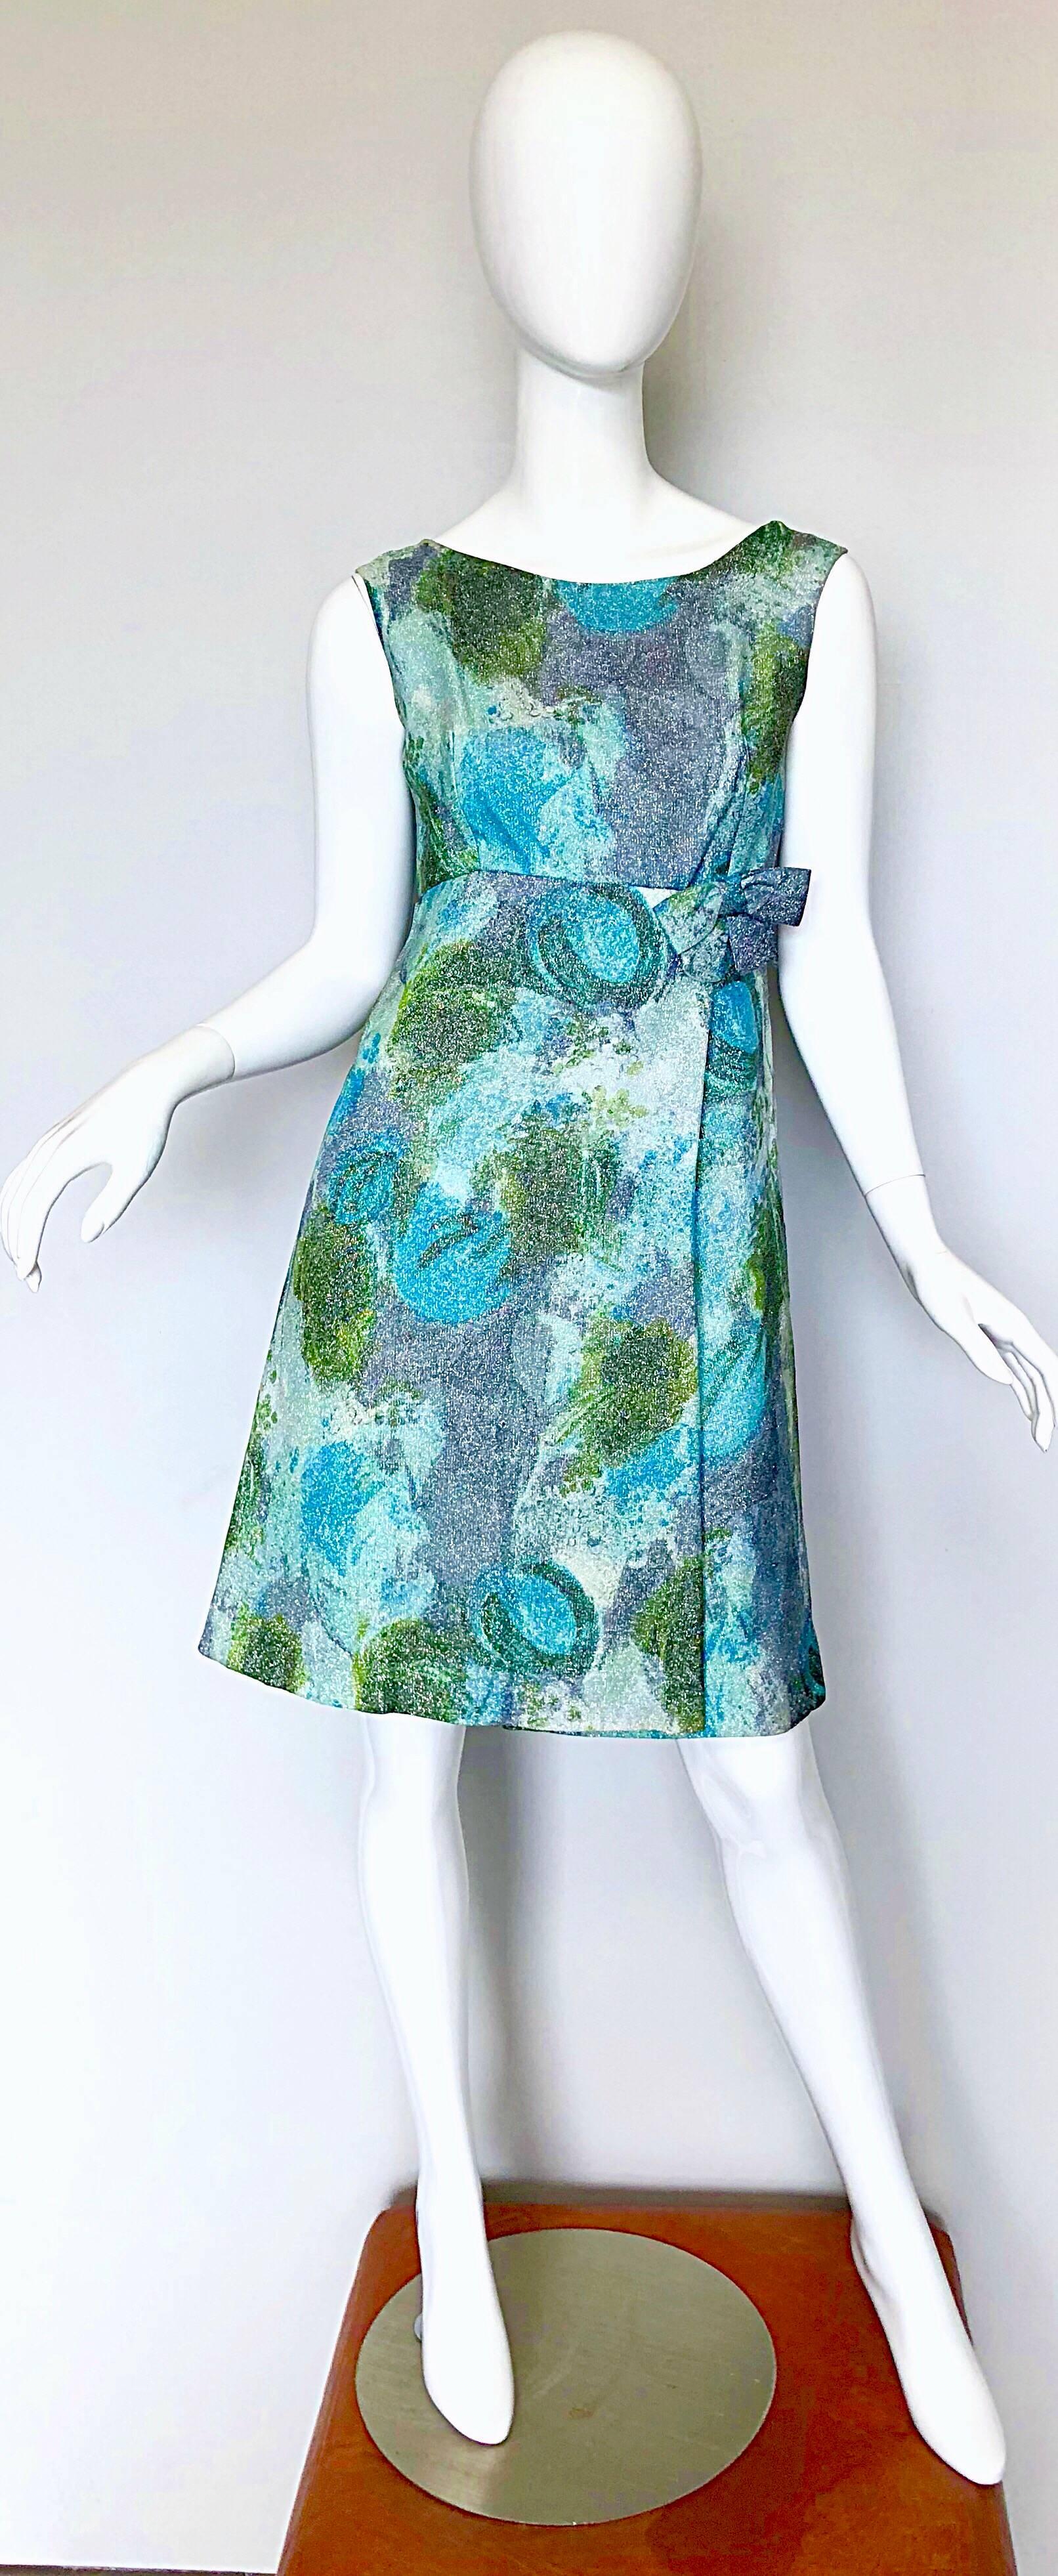 Chic 1960s HOLT RENFREW demi couture silk lurex blend A-Line dress! Features vibrant watercolor prints throughout. Tailored fitted bodice, with a slightly flared skirt. Pre-tied bow under front left center bust. Three gunmetal silver engraved